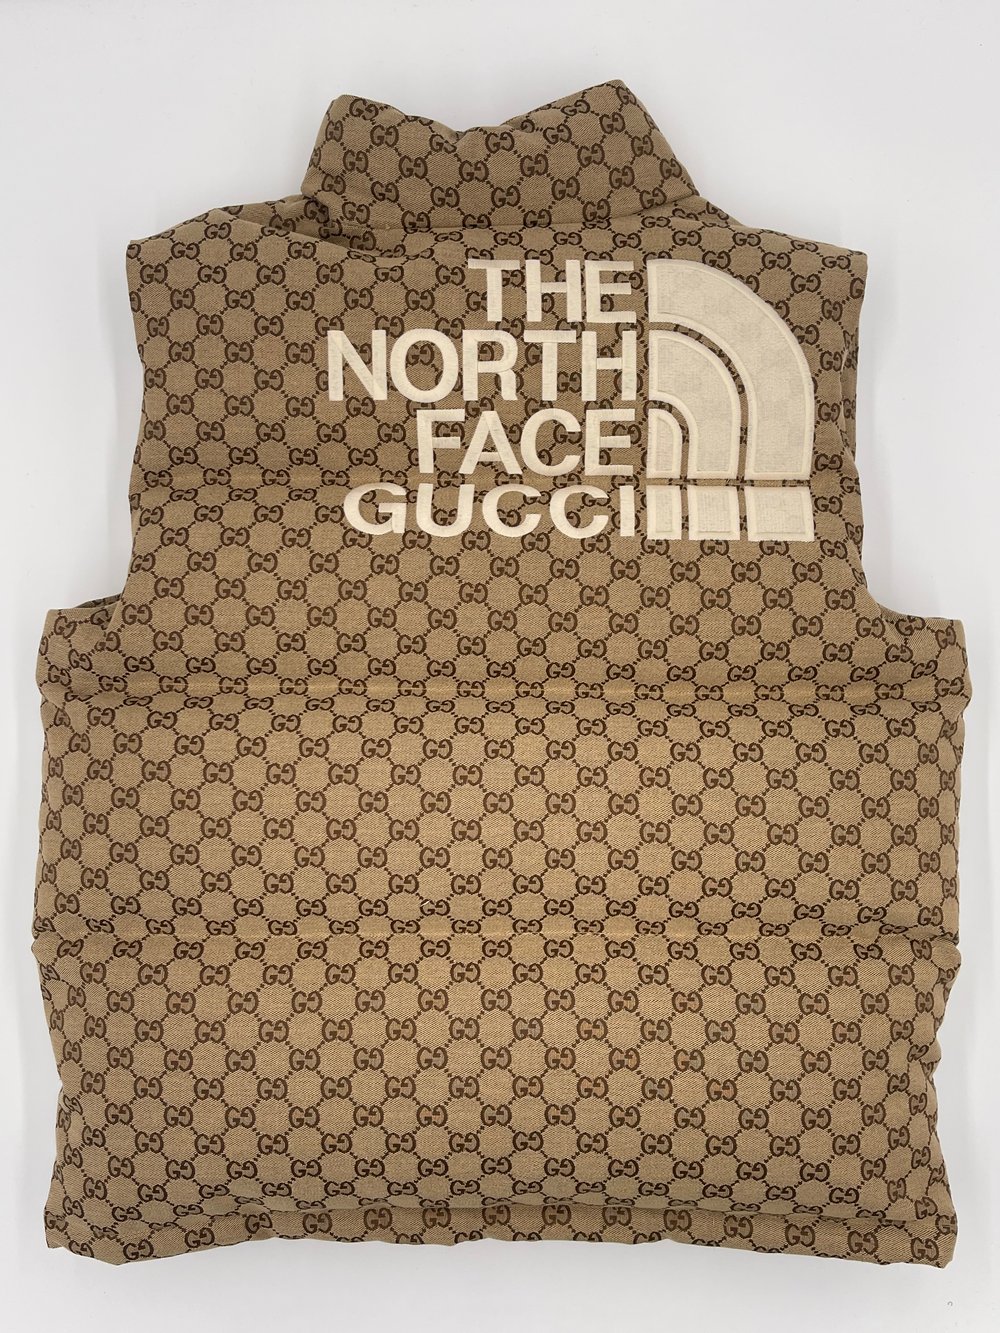 The North Face x Gucci Down Vest Navy (Size Medium) - Gently